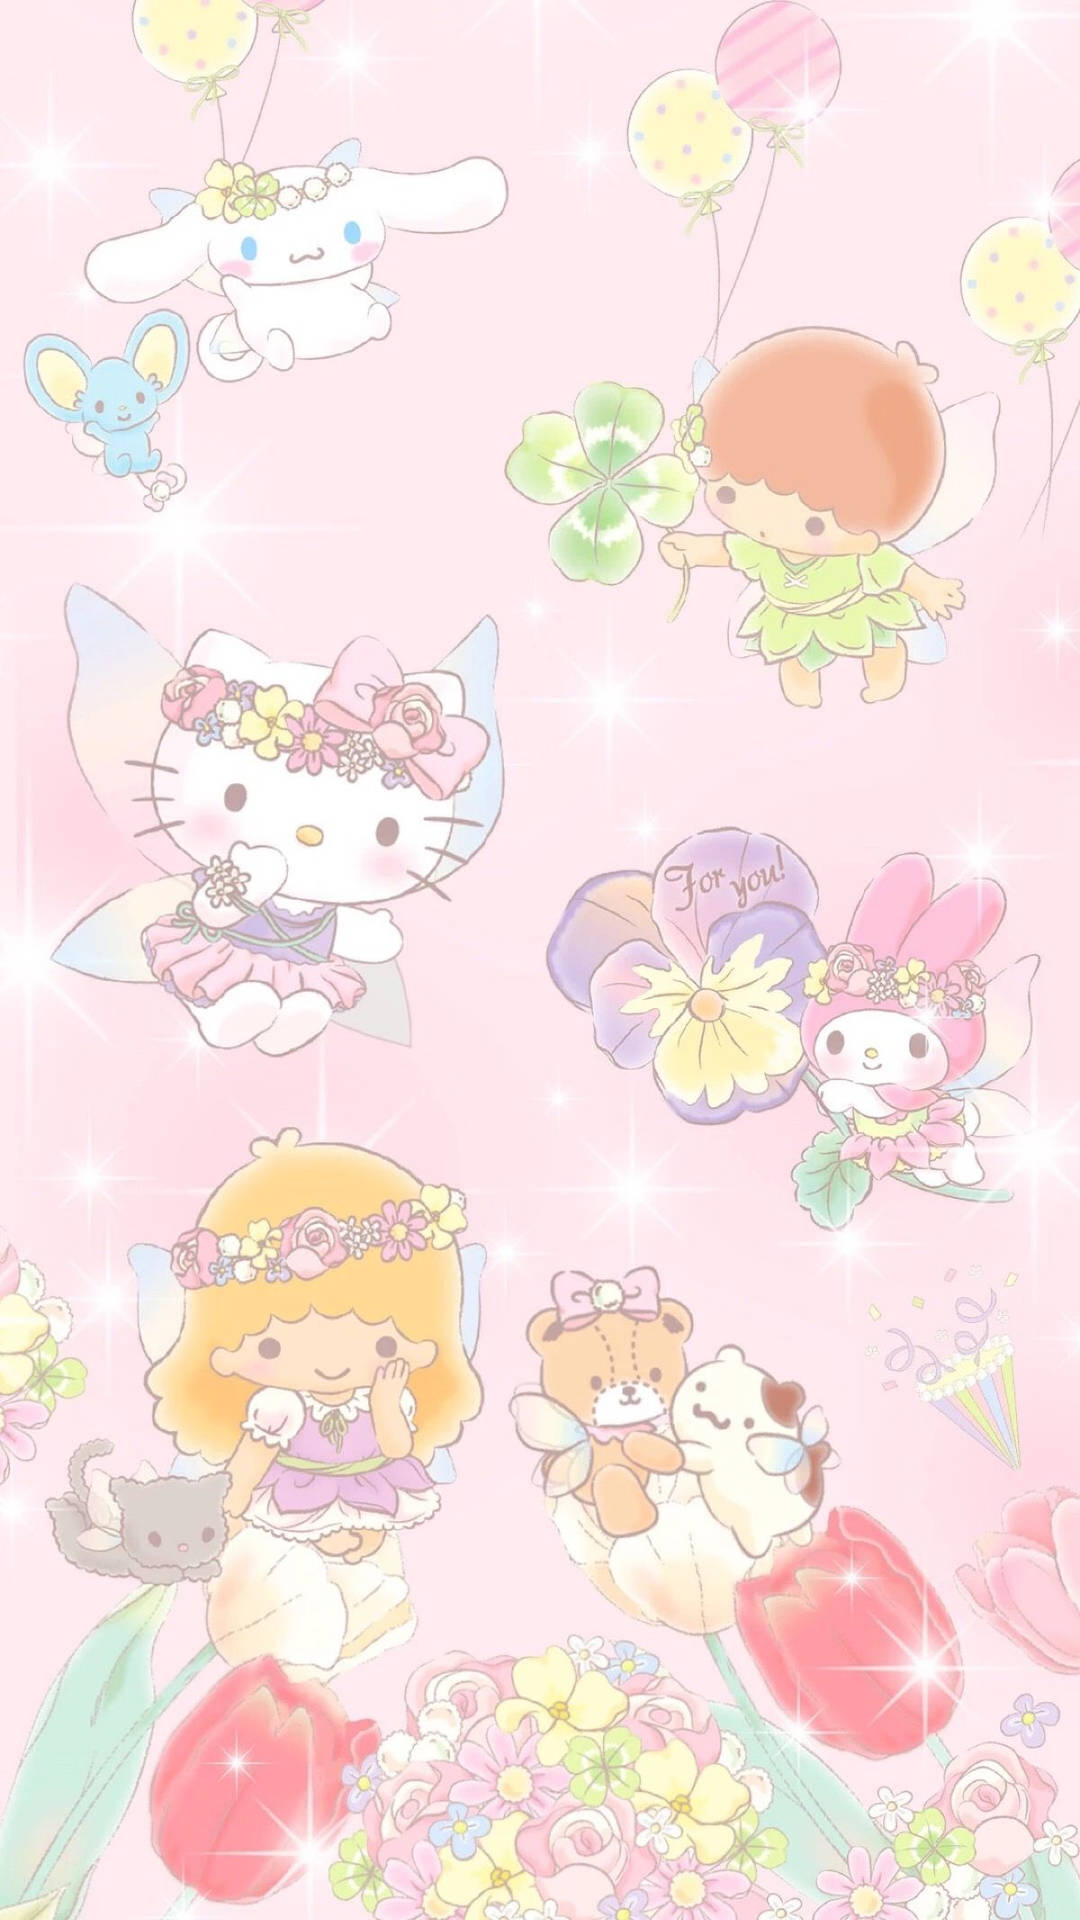 Make Friends With Sanrio's Fairy Friends! Background